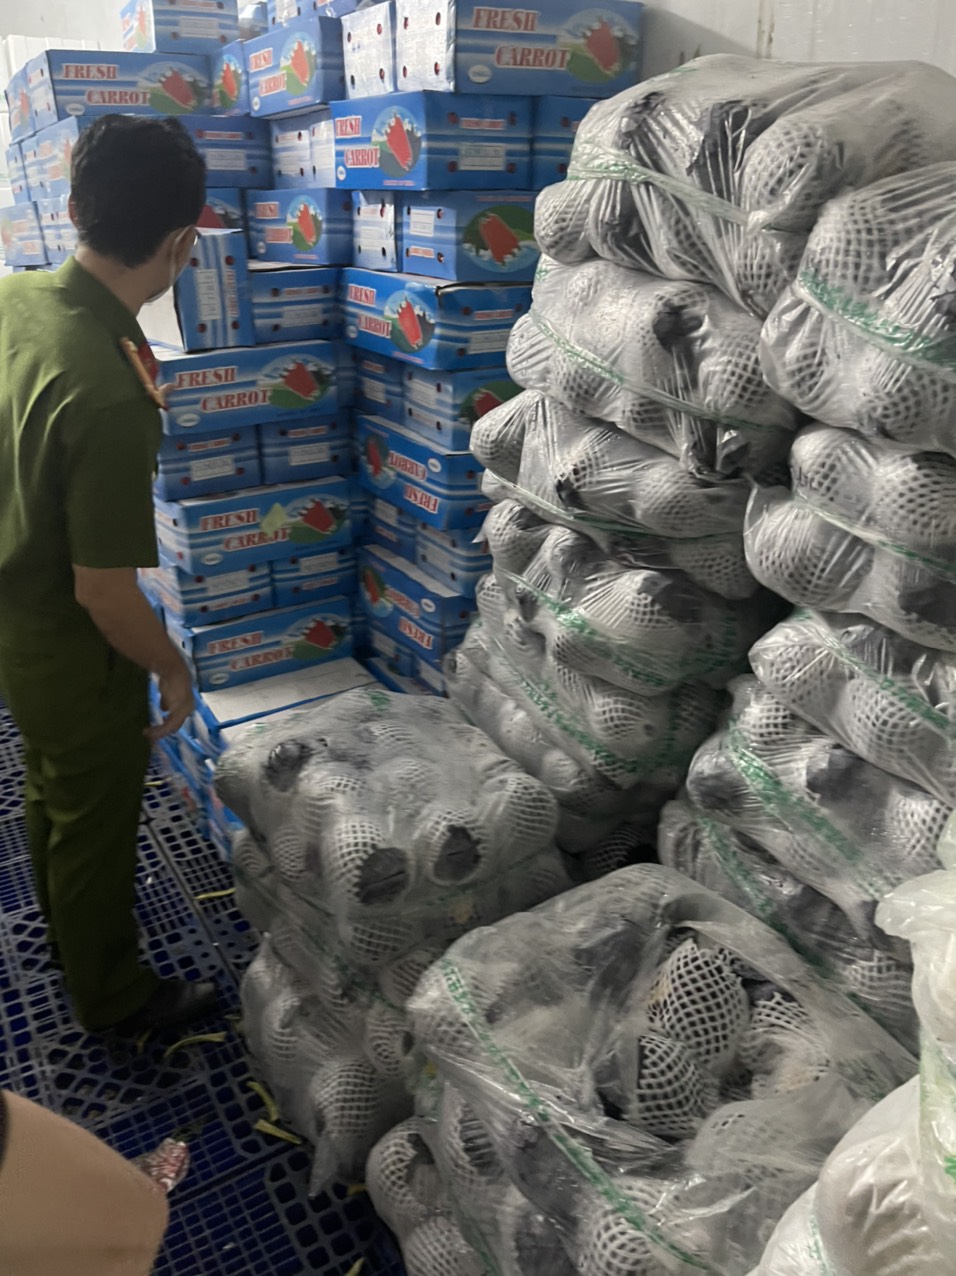 Tons of vegetables of unknown origin found at Ho Chi Minh City supplier’s warehouses